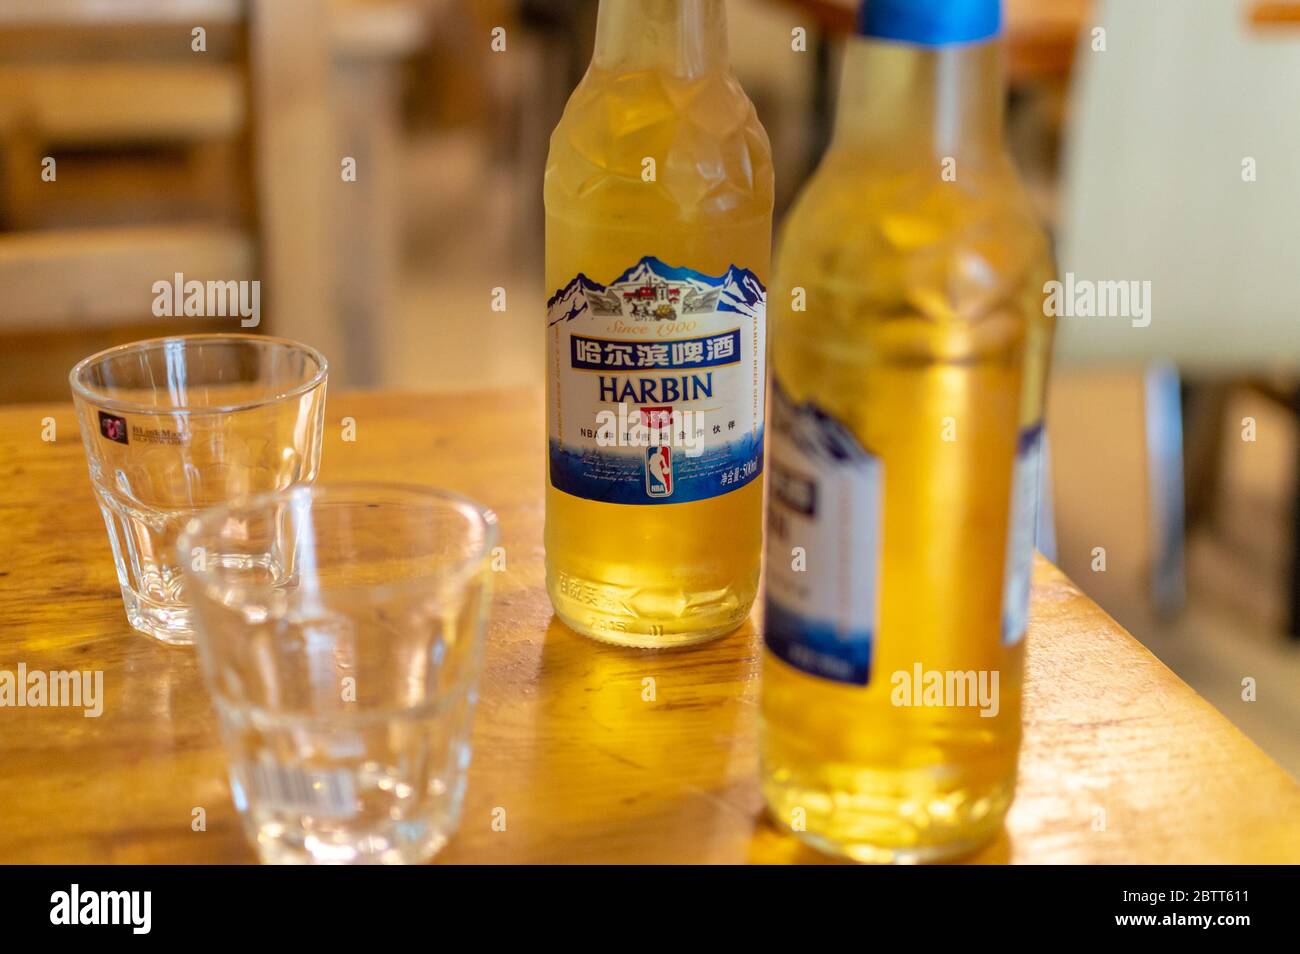 Beijing / China - July 17, 2017: Cold bottles of Harbin Beer served in the restaurant Stock Photo